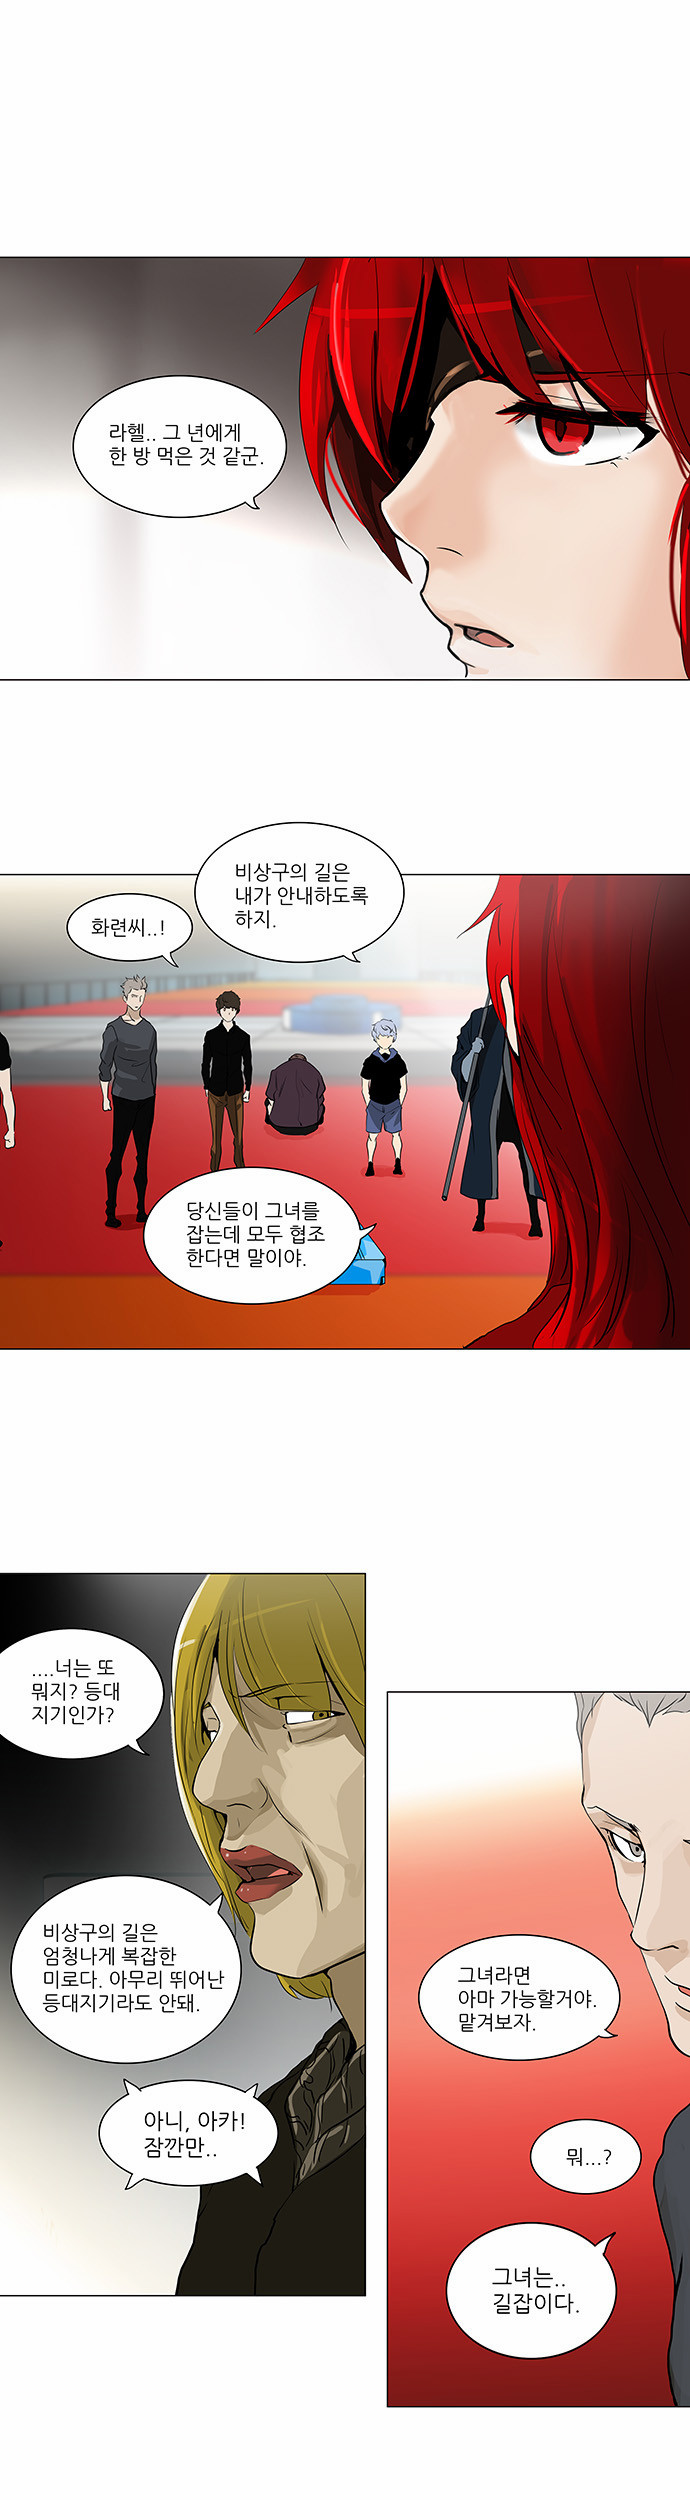 Tower of God - Chapter 215 - Page 1